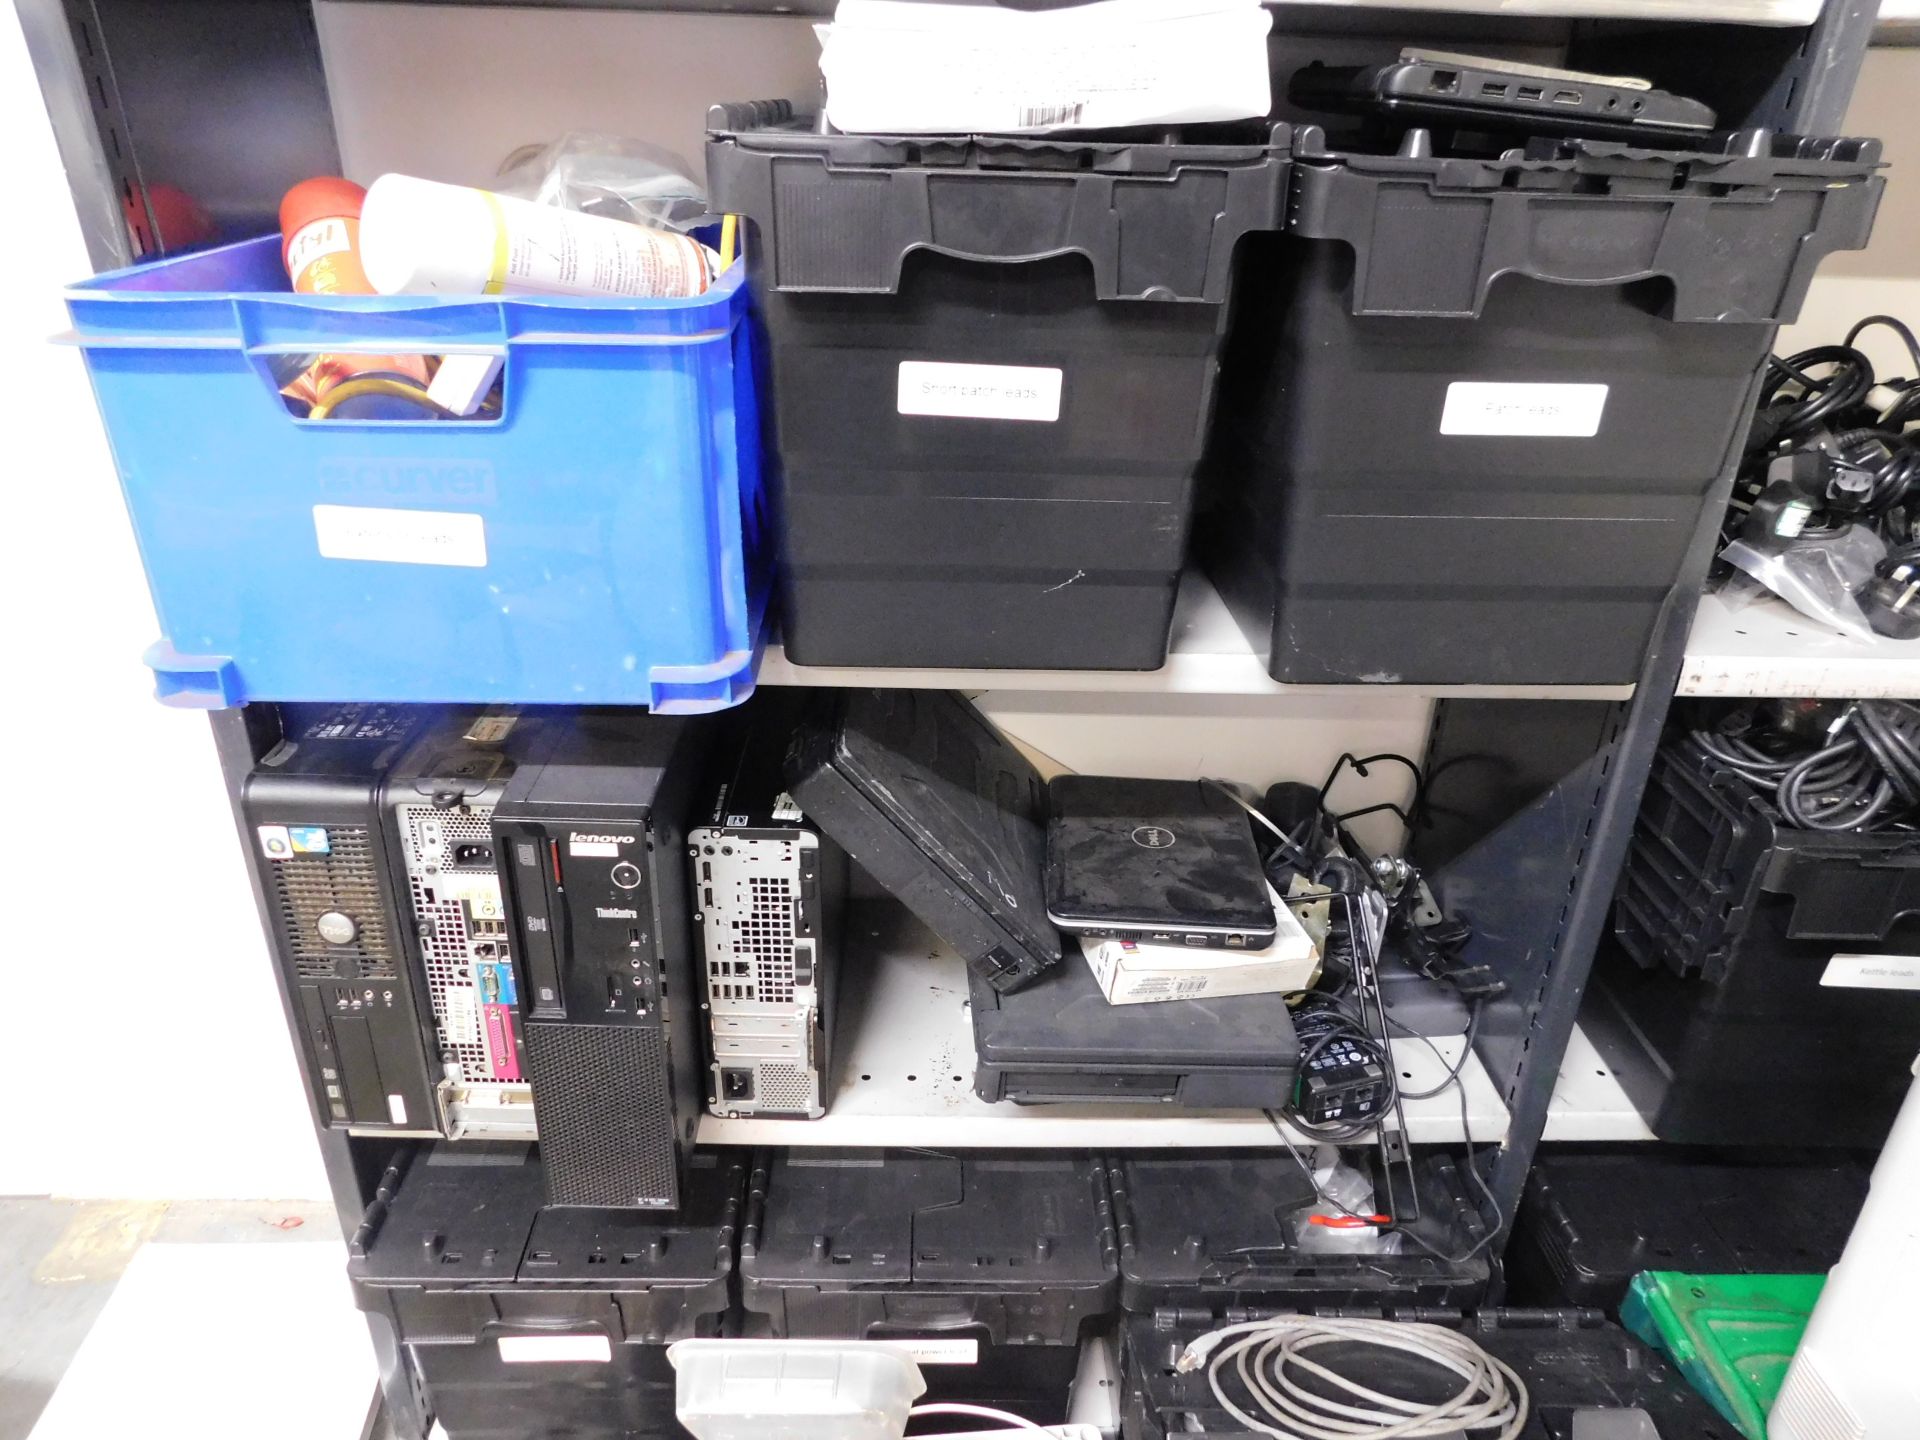 Room & Contents of Workwear & Exhibition Stands (Laptops, Computers & Contents of Comms Cabinet - Image 6 of 11